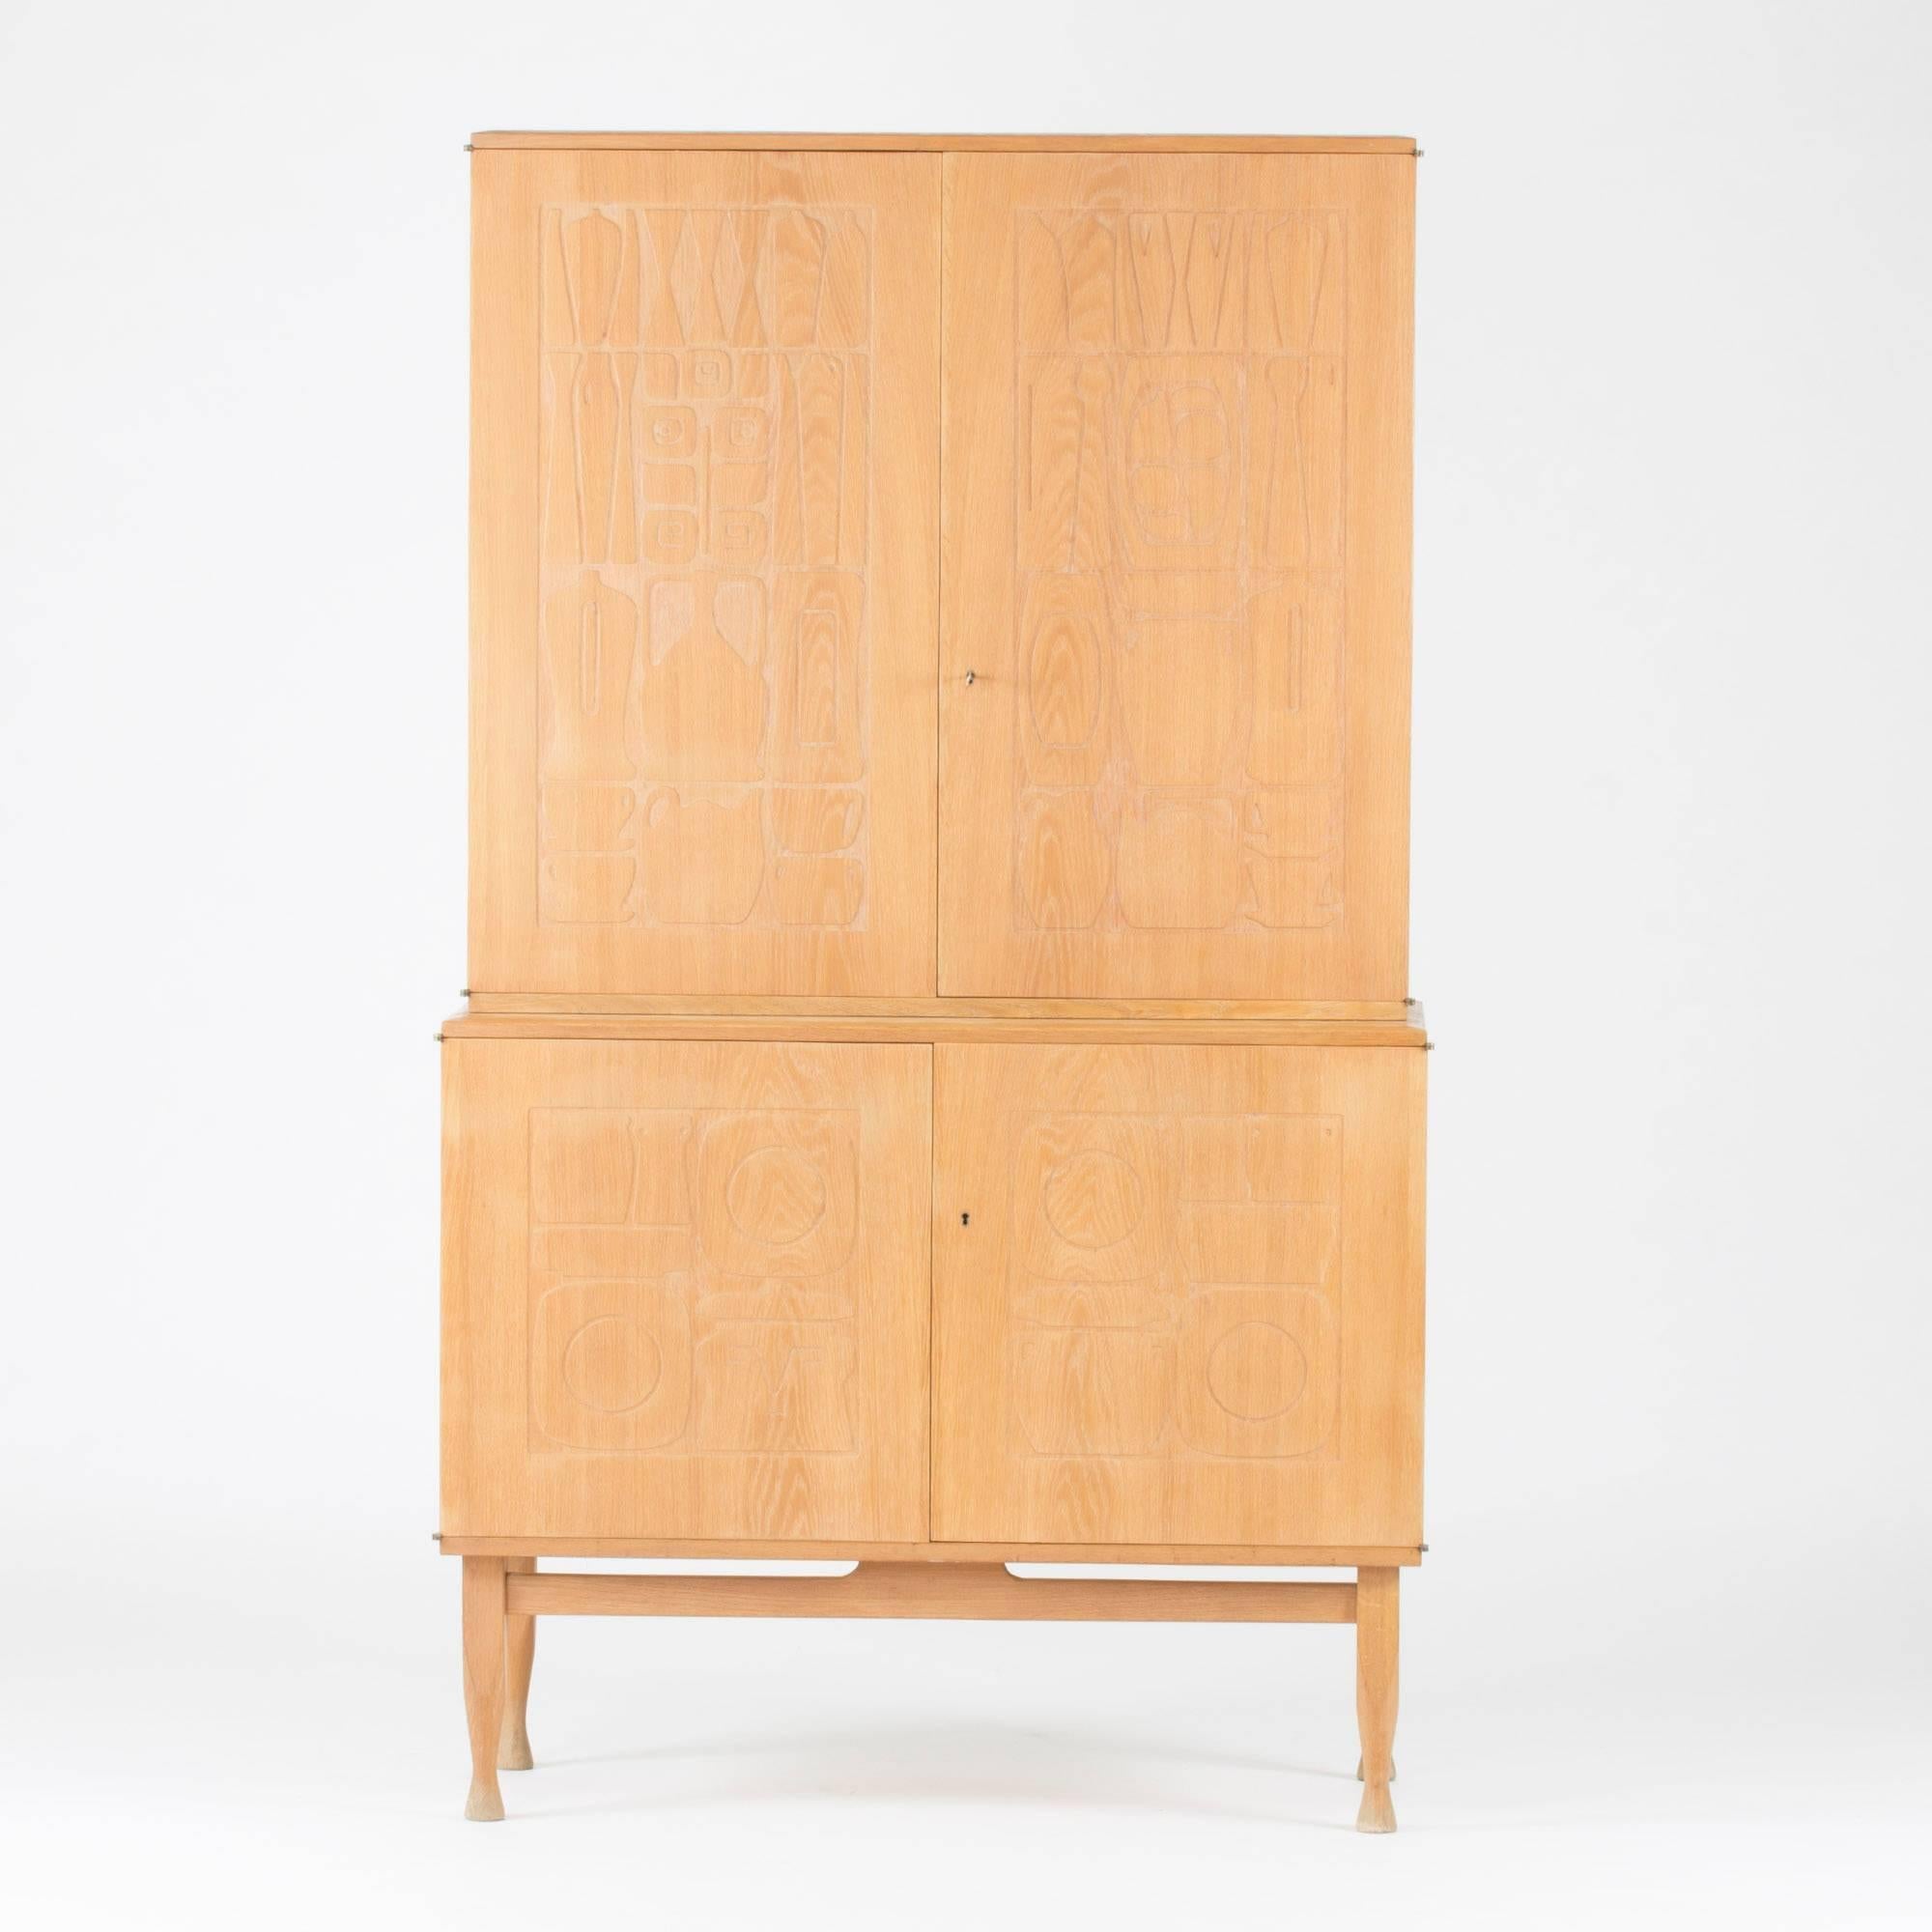 "Krus" ("Vessel") cabinet by Yngve Ekström, in a rare edition in washed oak and with sculpted legs. The front doors display a modernistic relief of everyday kitchen objects mixed with flowers and decorative objects. An arty,